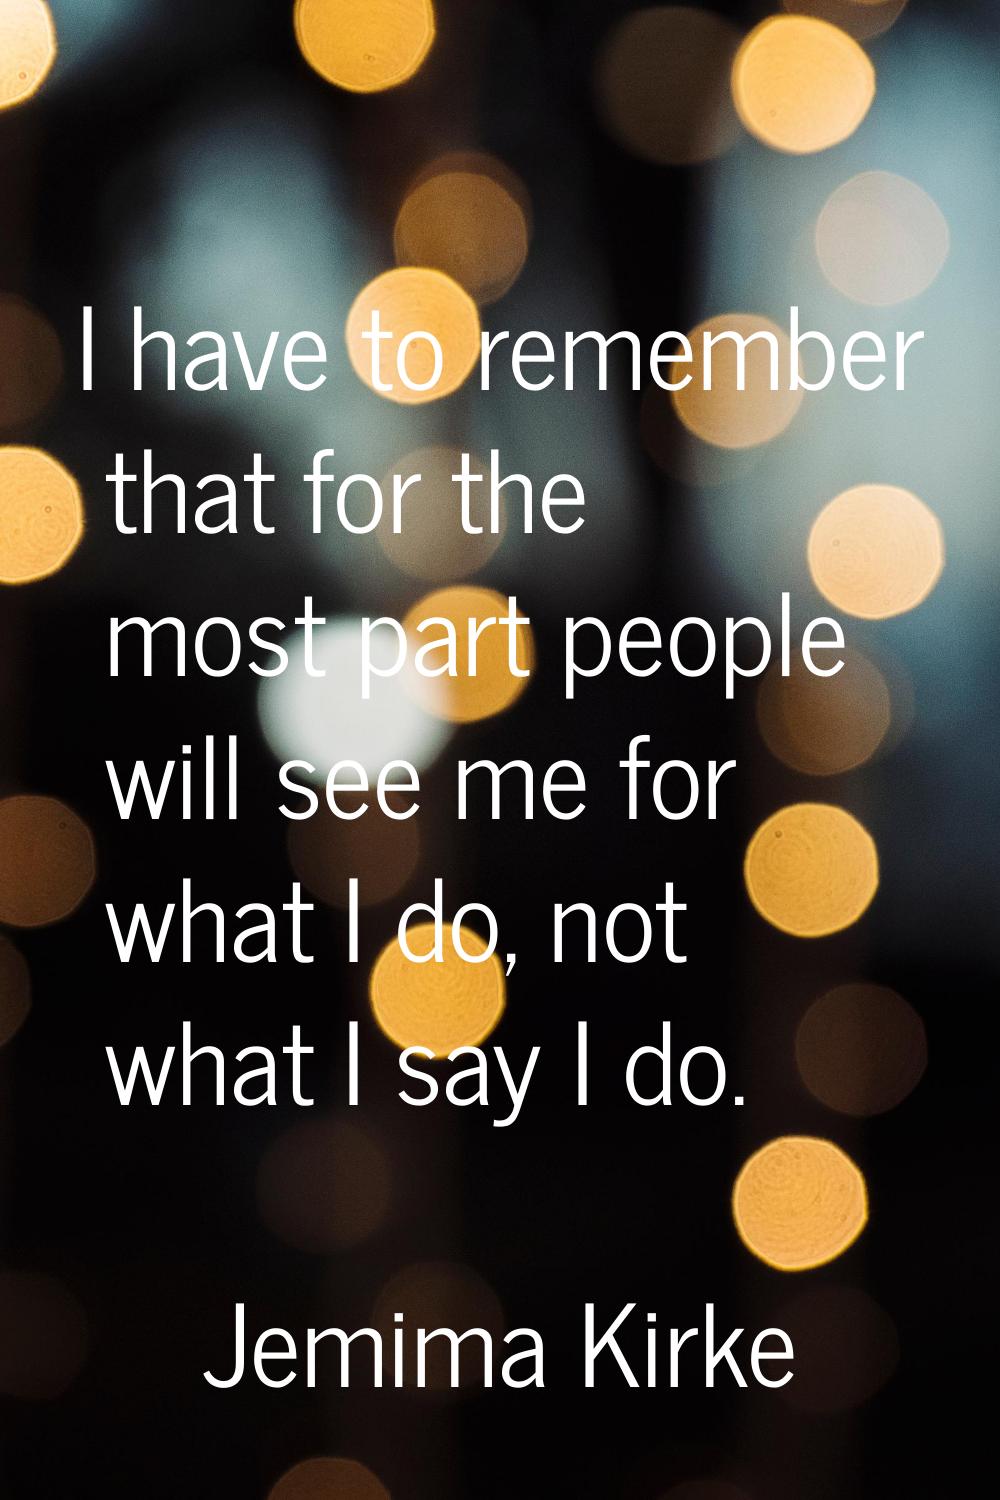 I have to remember that for the most part people will see me for what I do, not what I say I do.